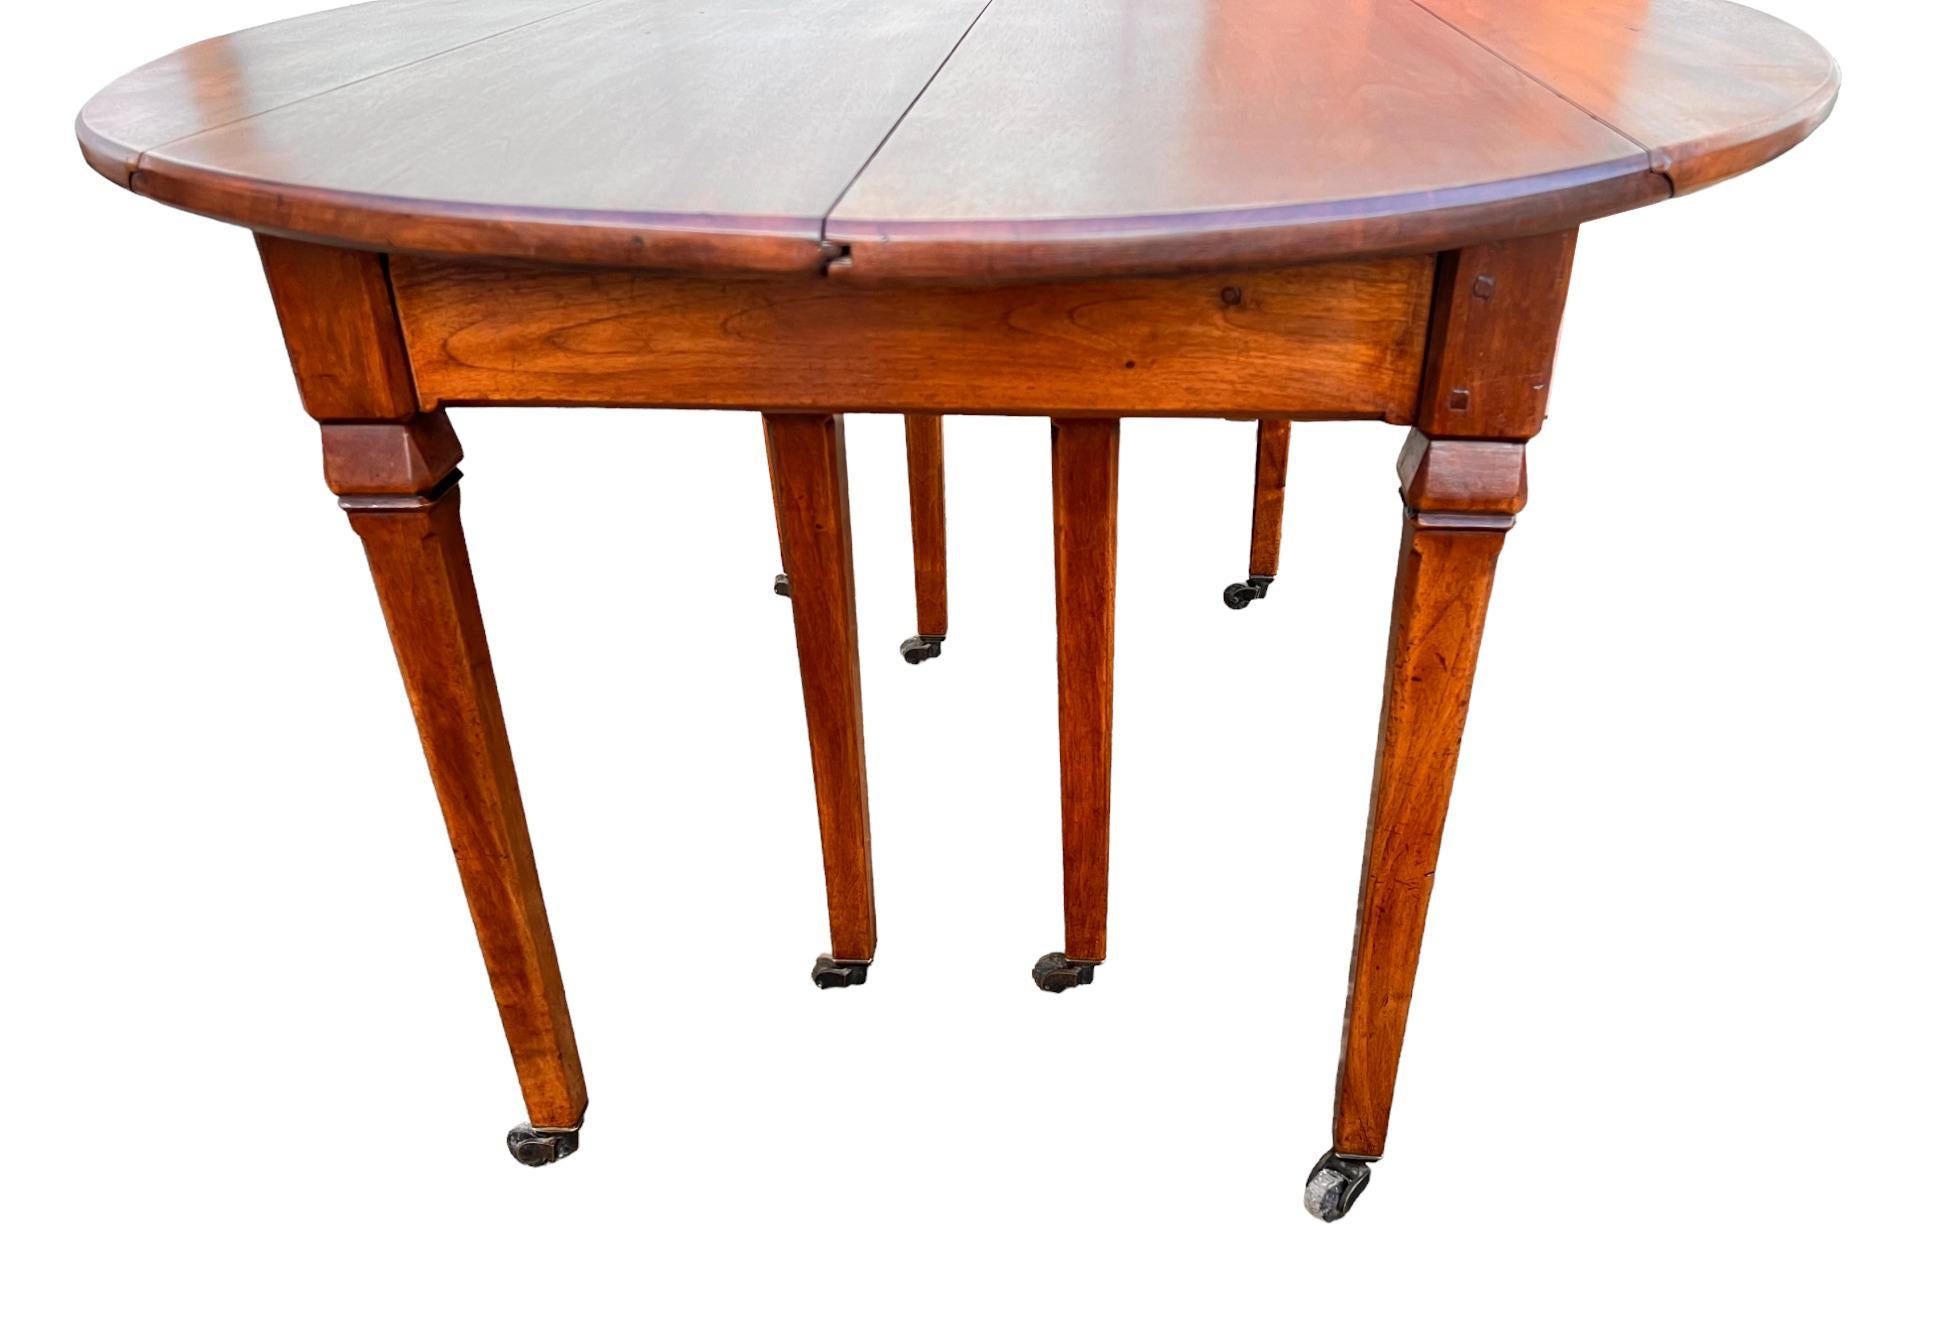 French Provincial Large 18th Century Banquet Table in Walnut 222 inches